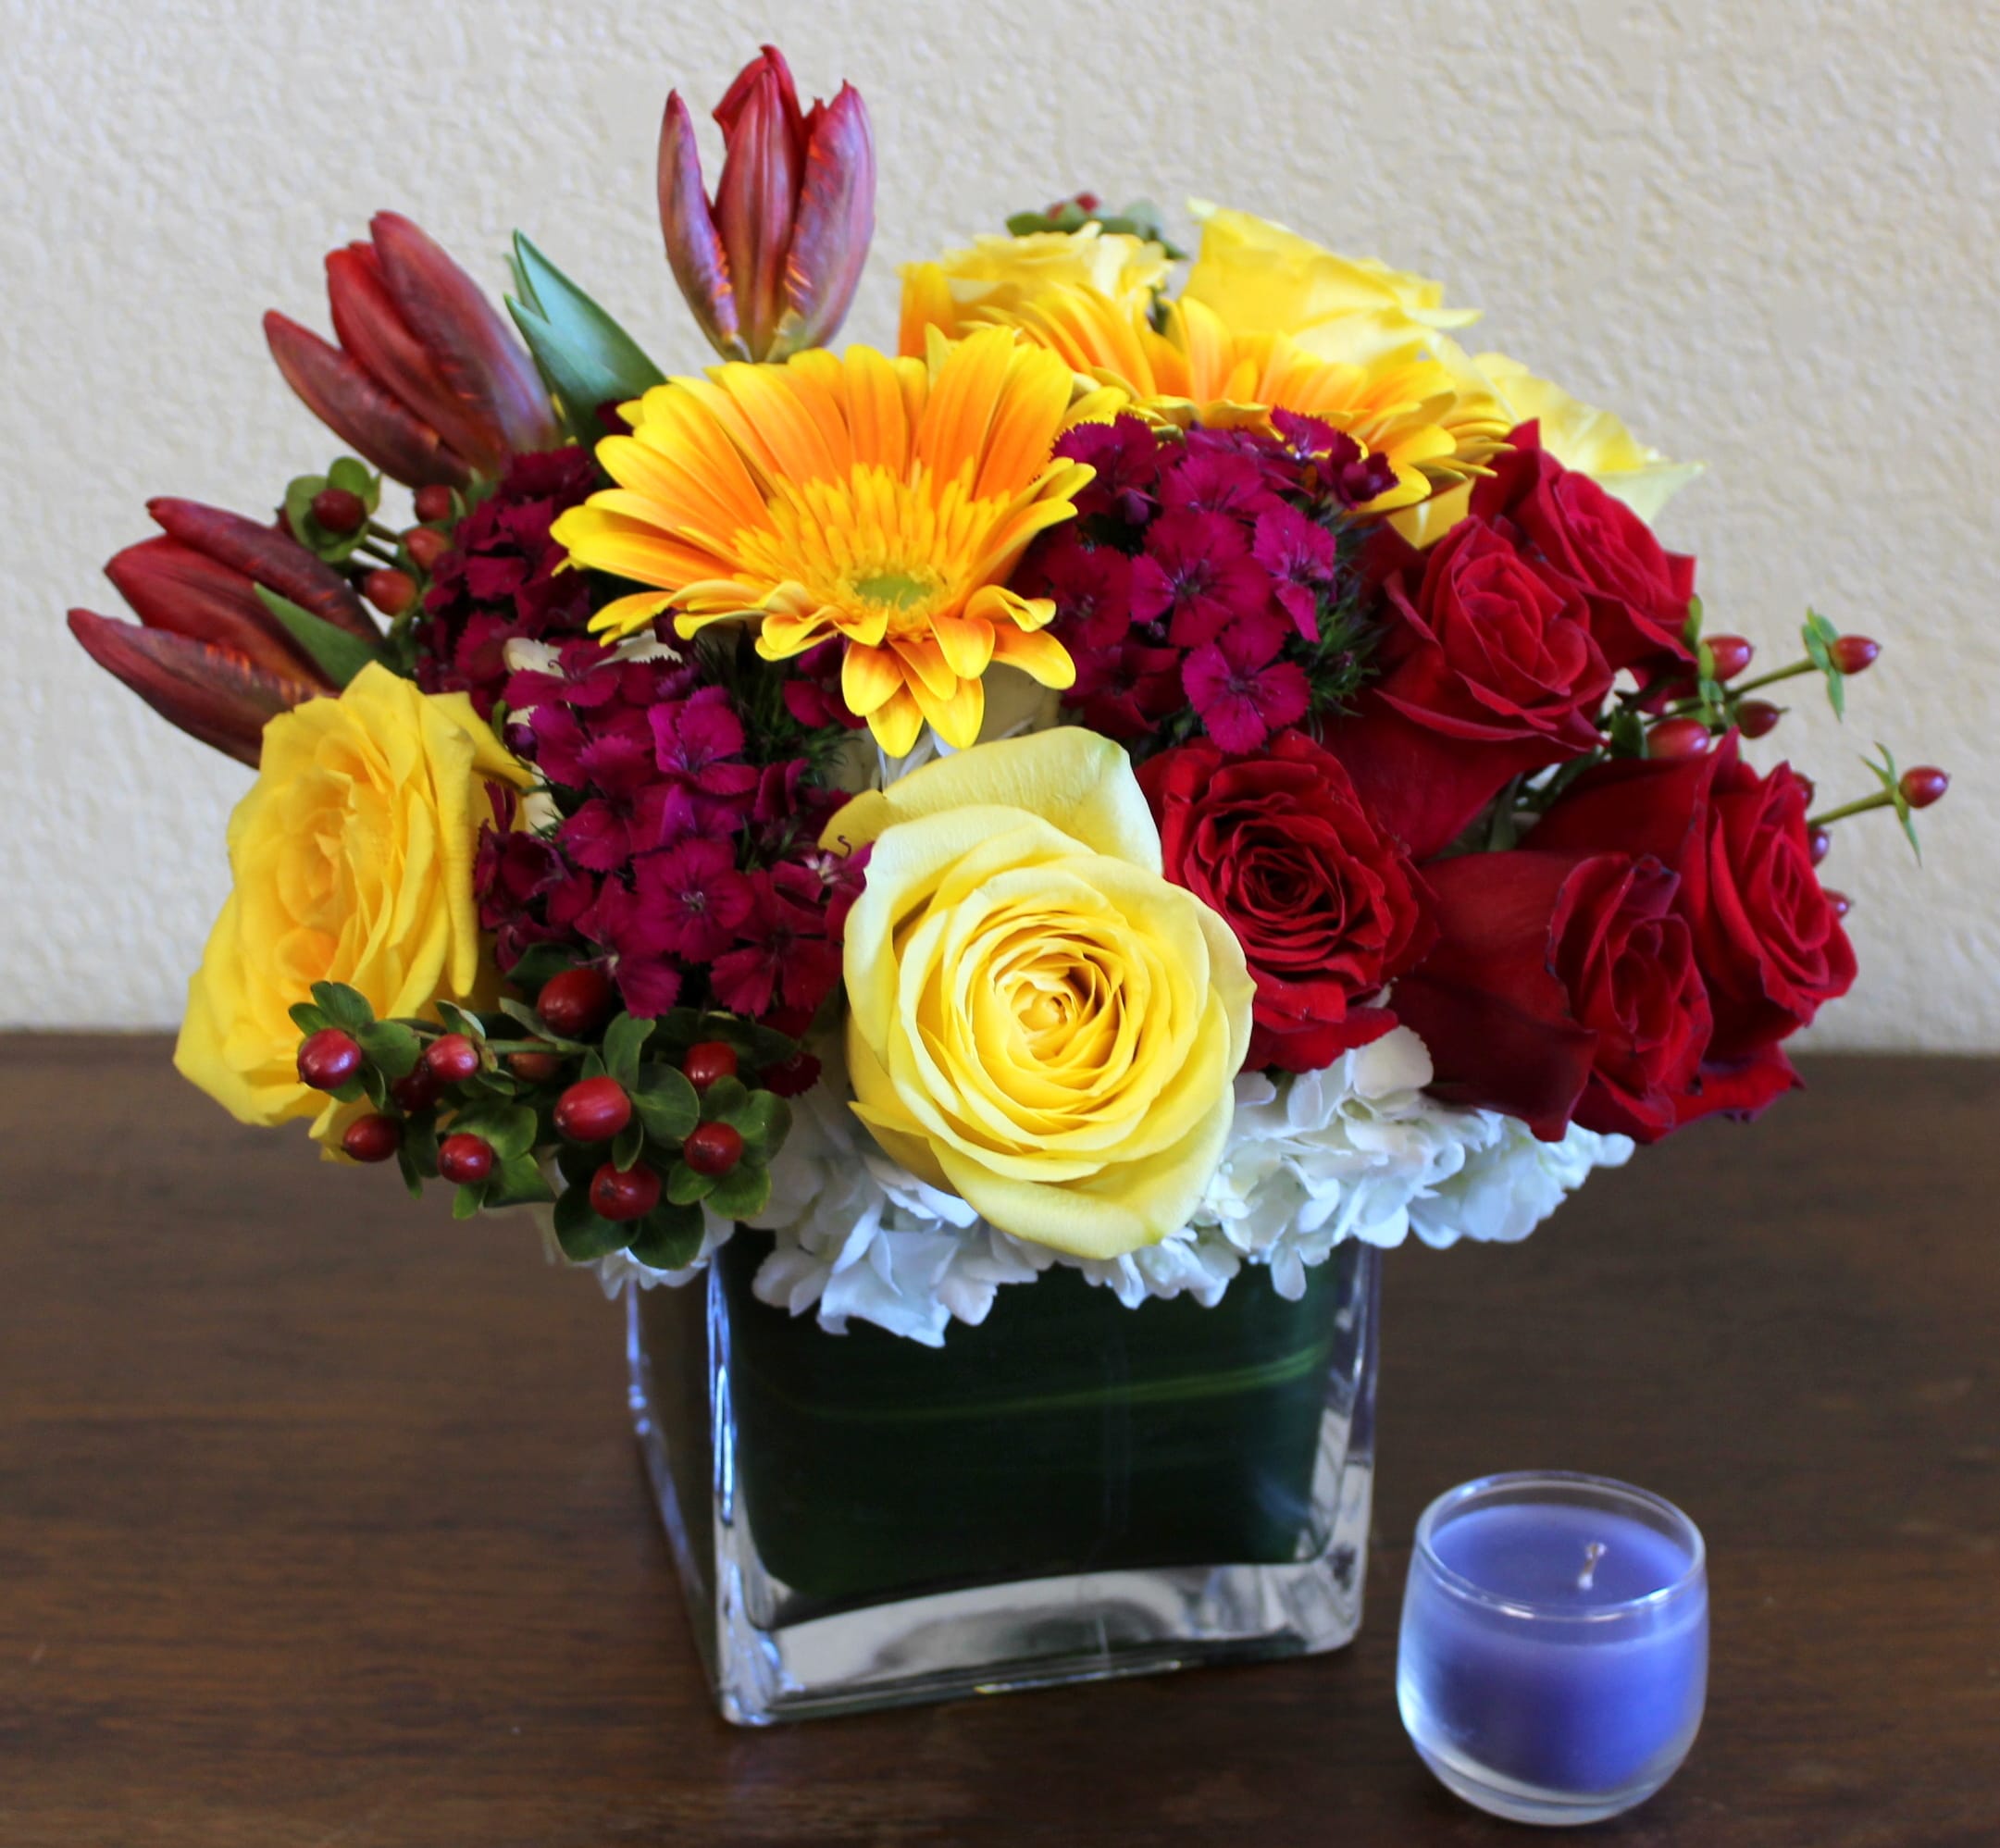 Summer Splender - Ruby red roses, tulips, touches of magenta, and yellows to brighten any day!